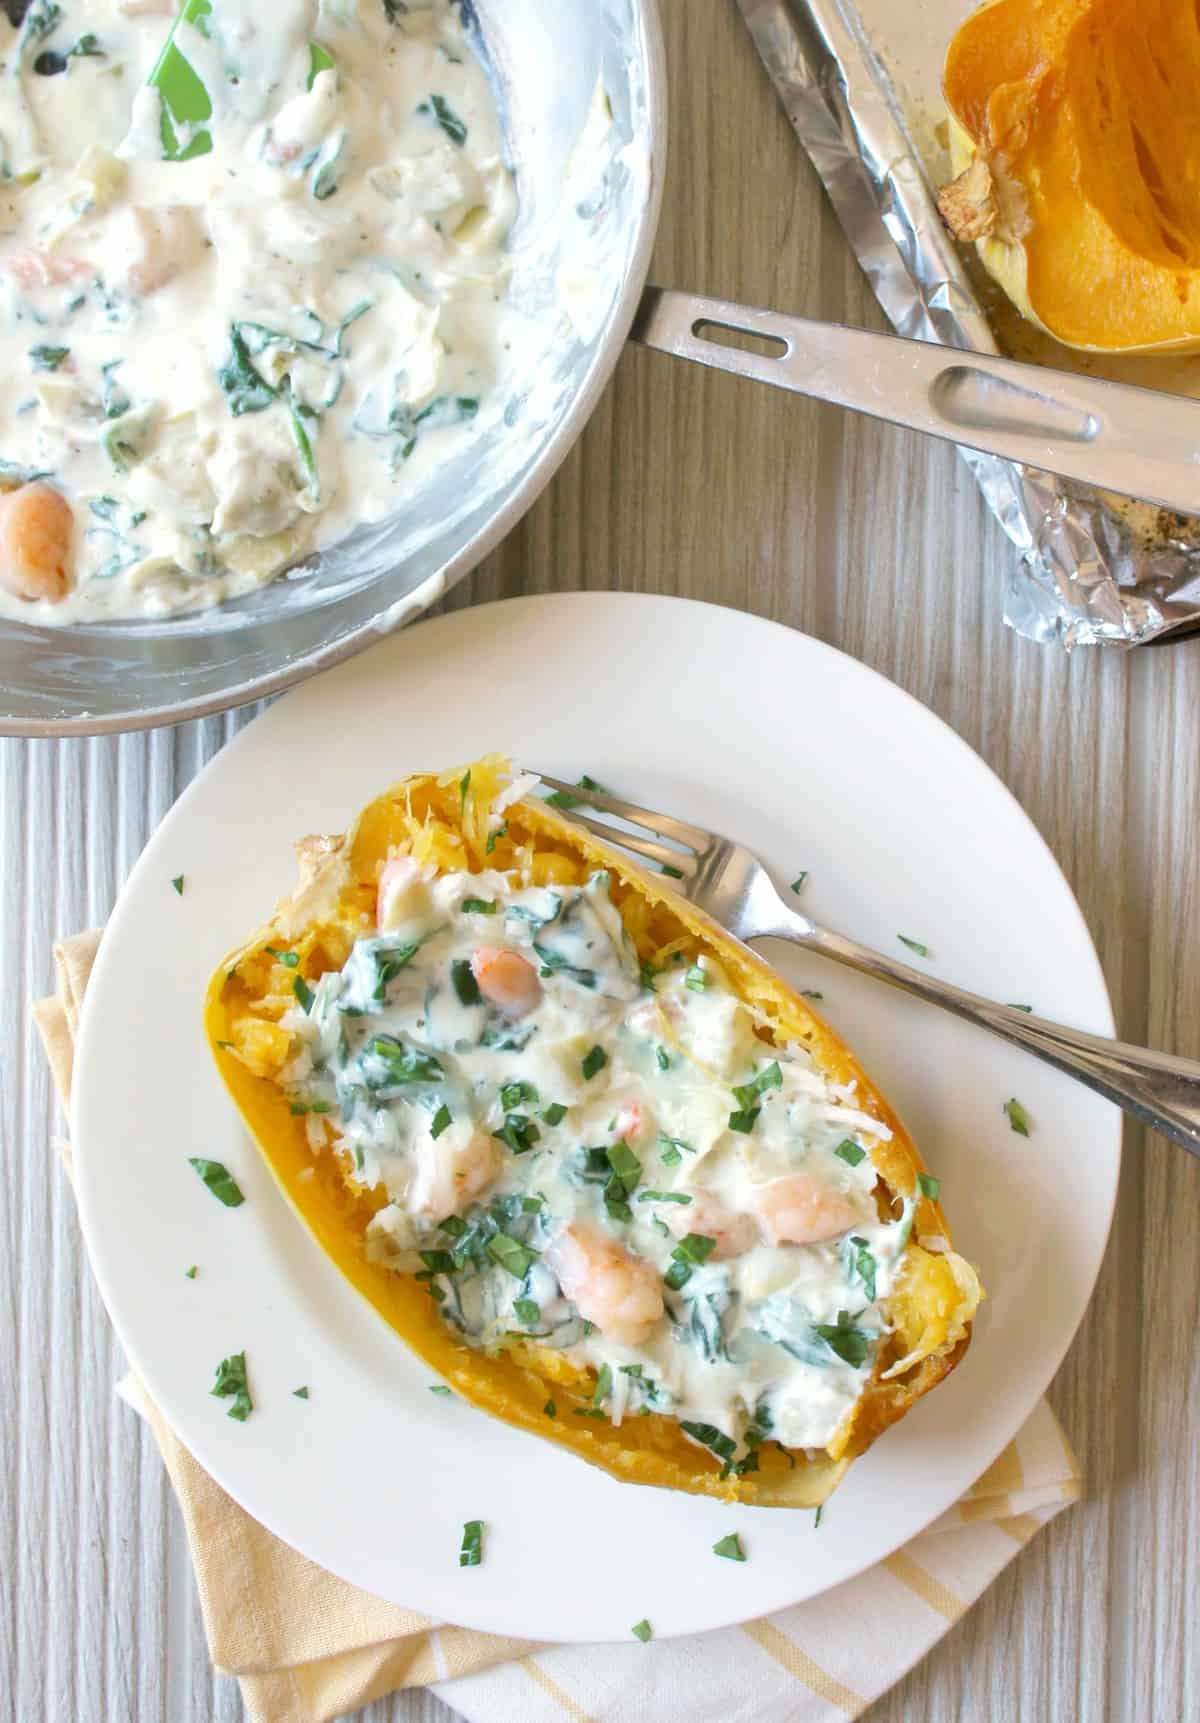 Creamy shrimp in a spinach and artichoke sauce spooned over roasted spaghetti squash boats